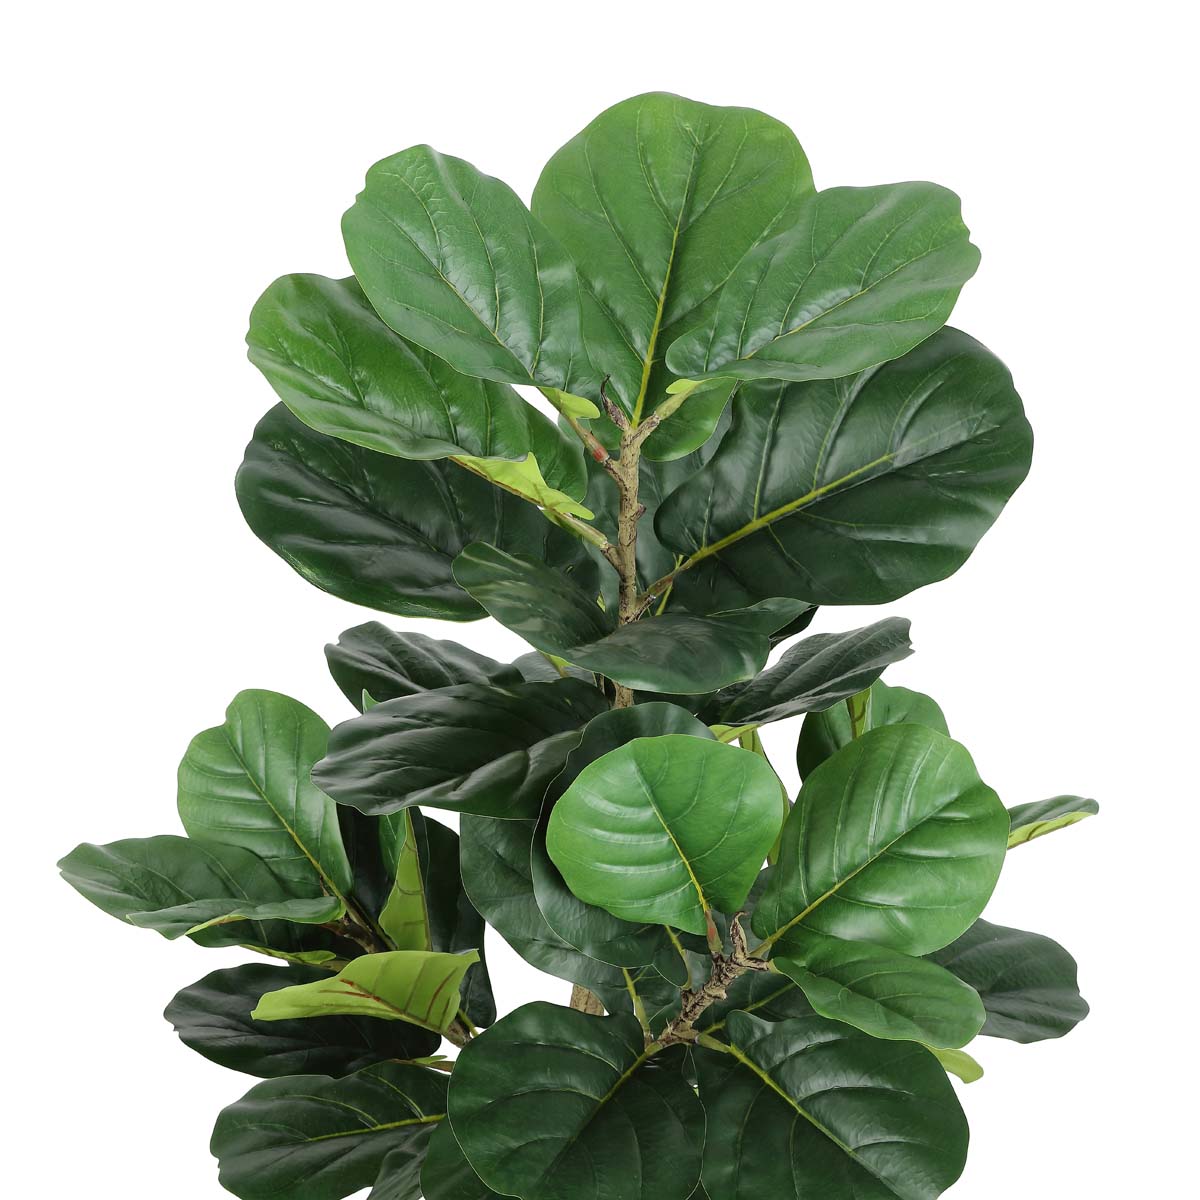 Safavieh Faux Multi Branch Fiddle Leaf Fig 72 Potted Tree , FXP2003